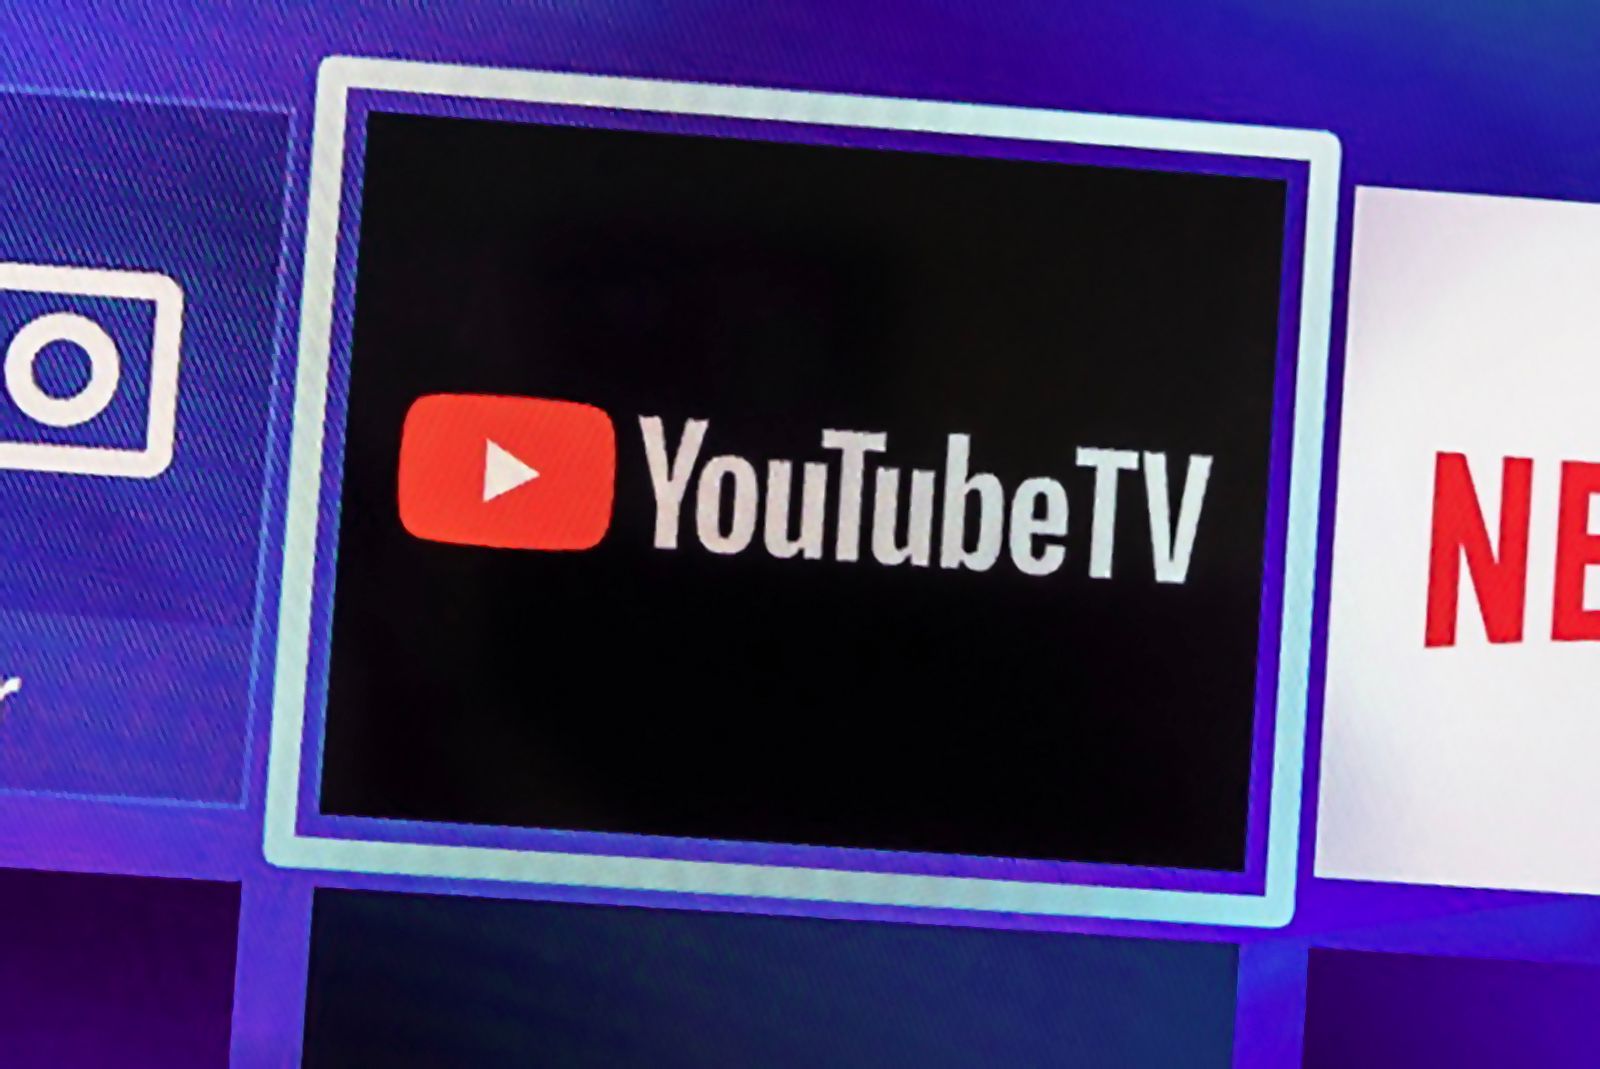 YouTube TV picture-in-picture rolling out to iOS 15 users photo 1